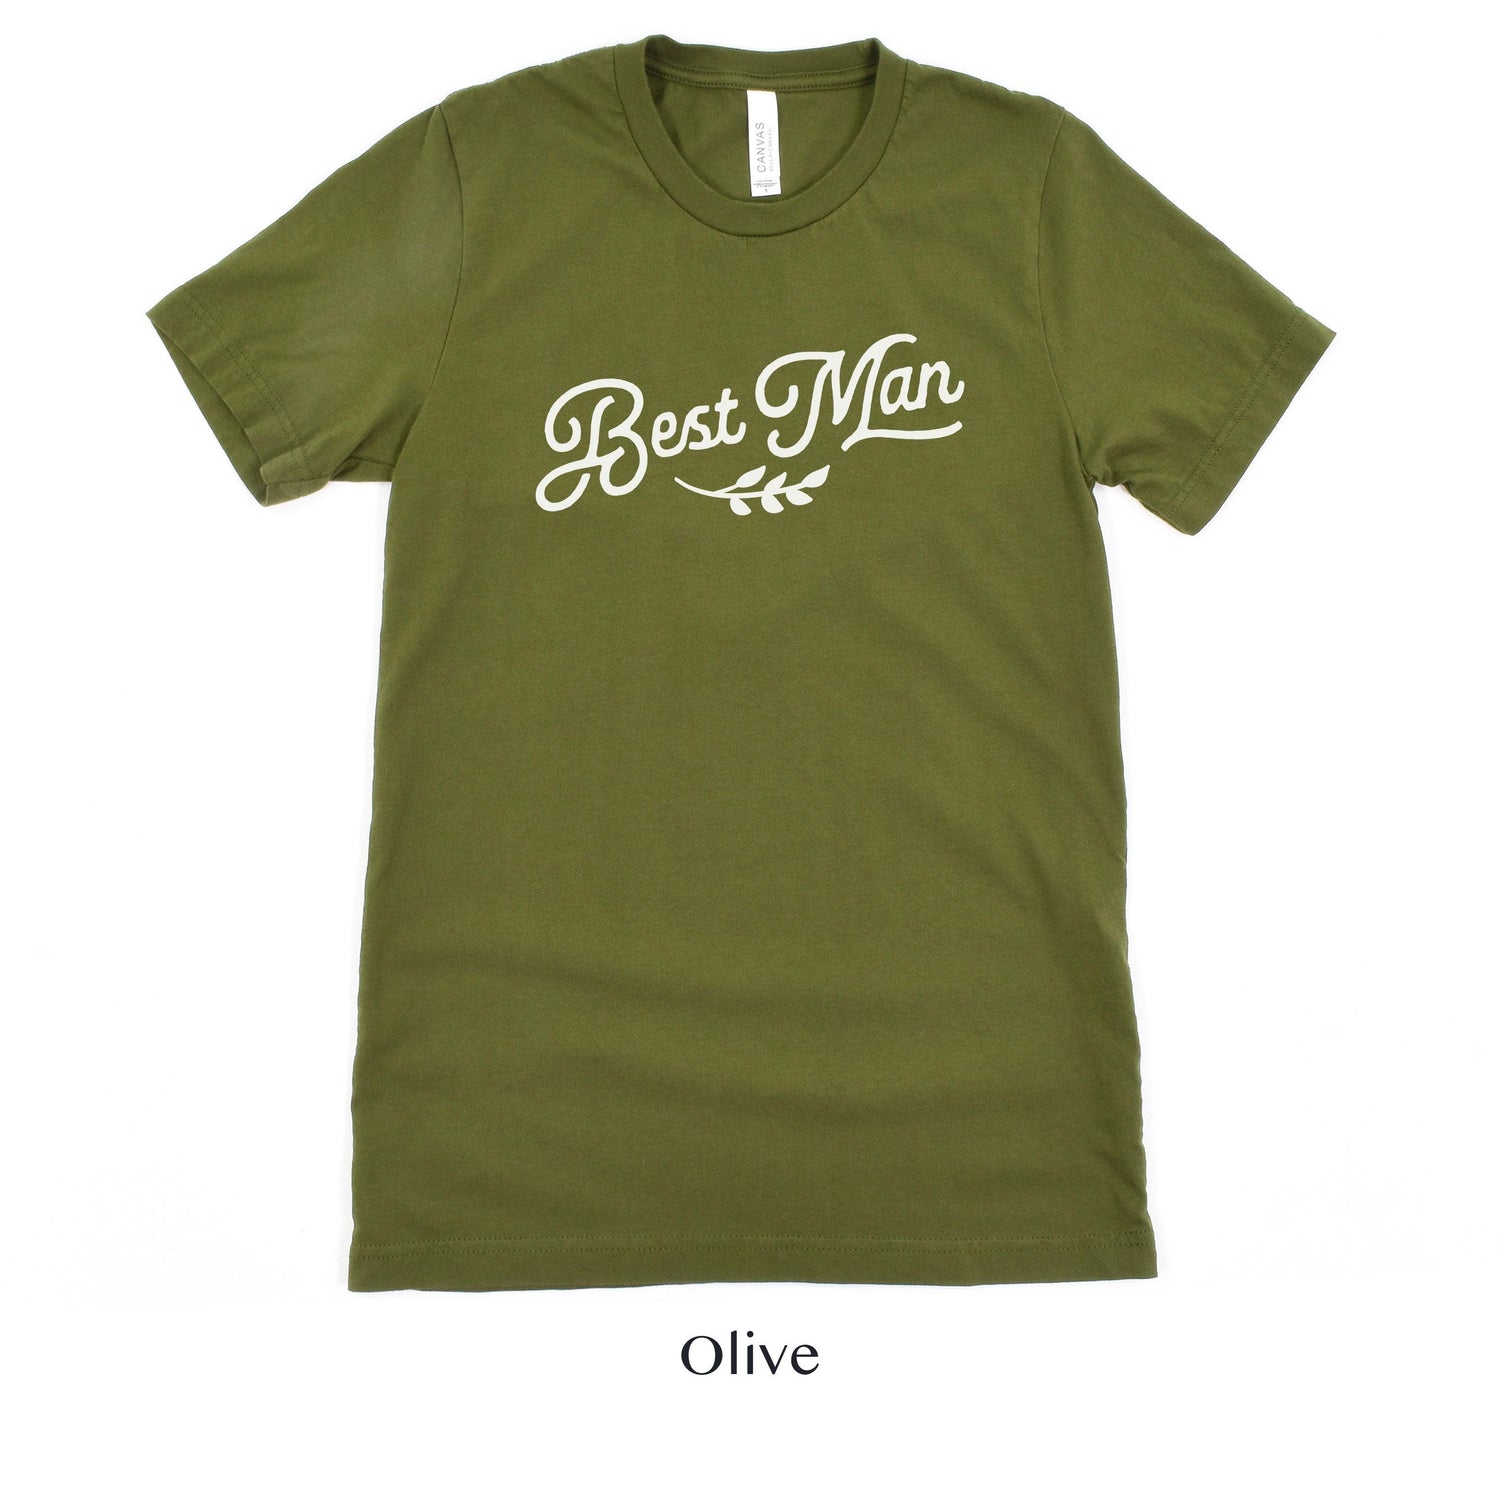 Best Man Short-Sleeve Tee - Small-5x Sizes Available by Oaklynn Lane - Olive Green Shirt